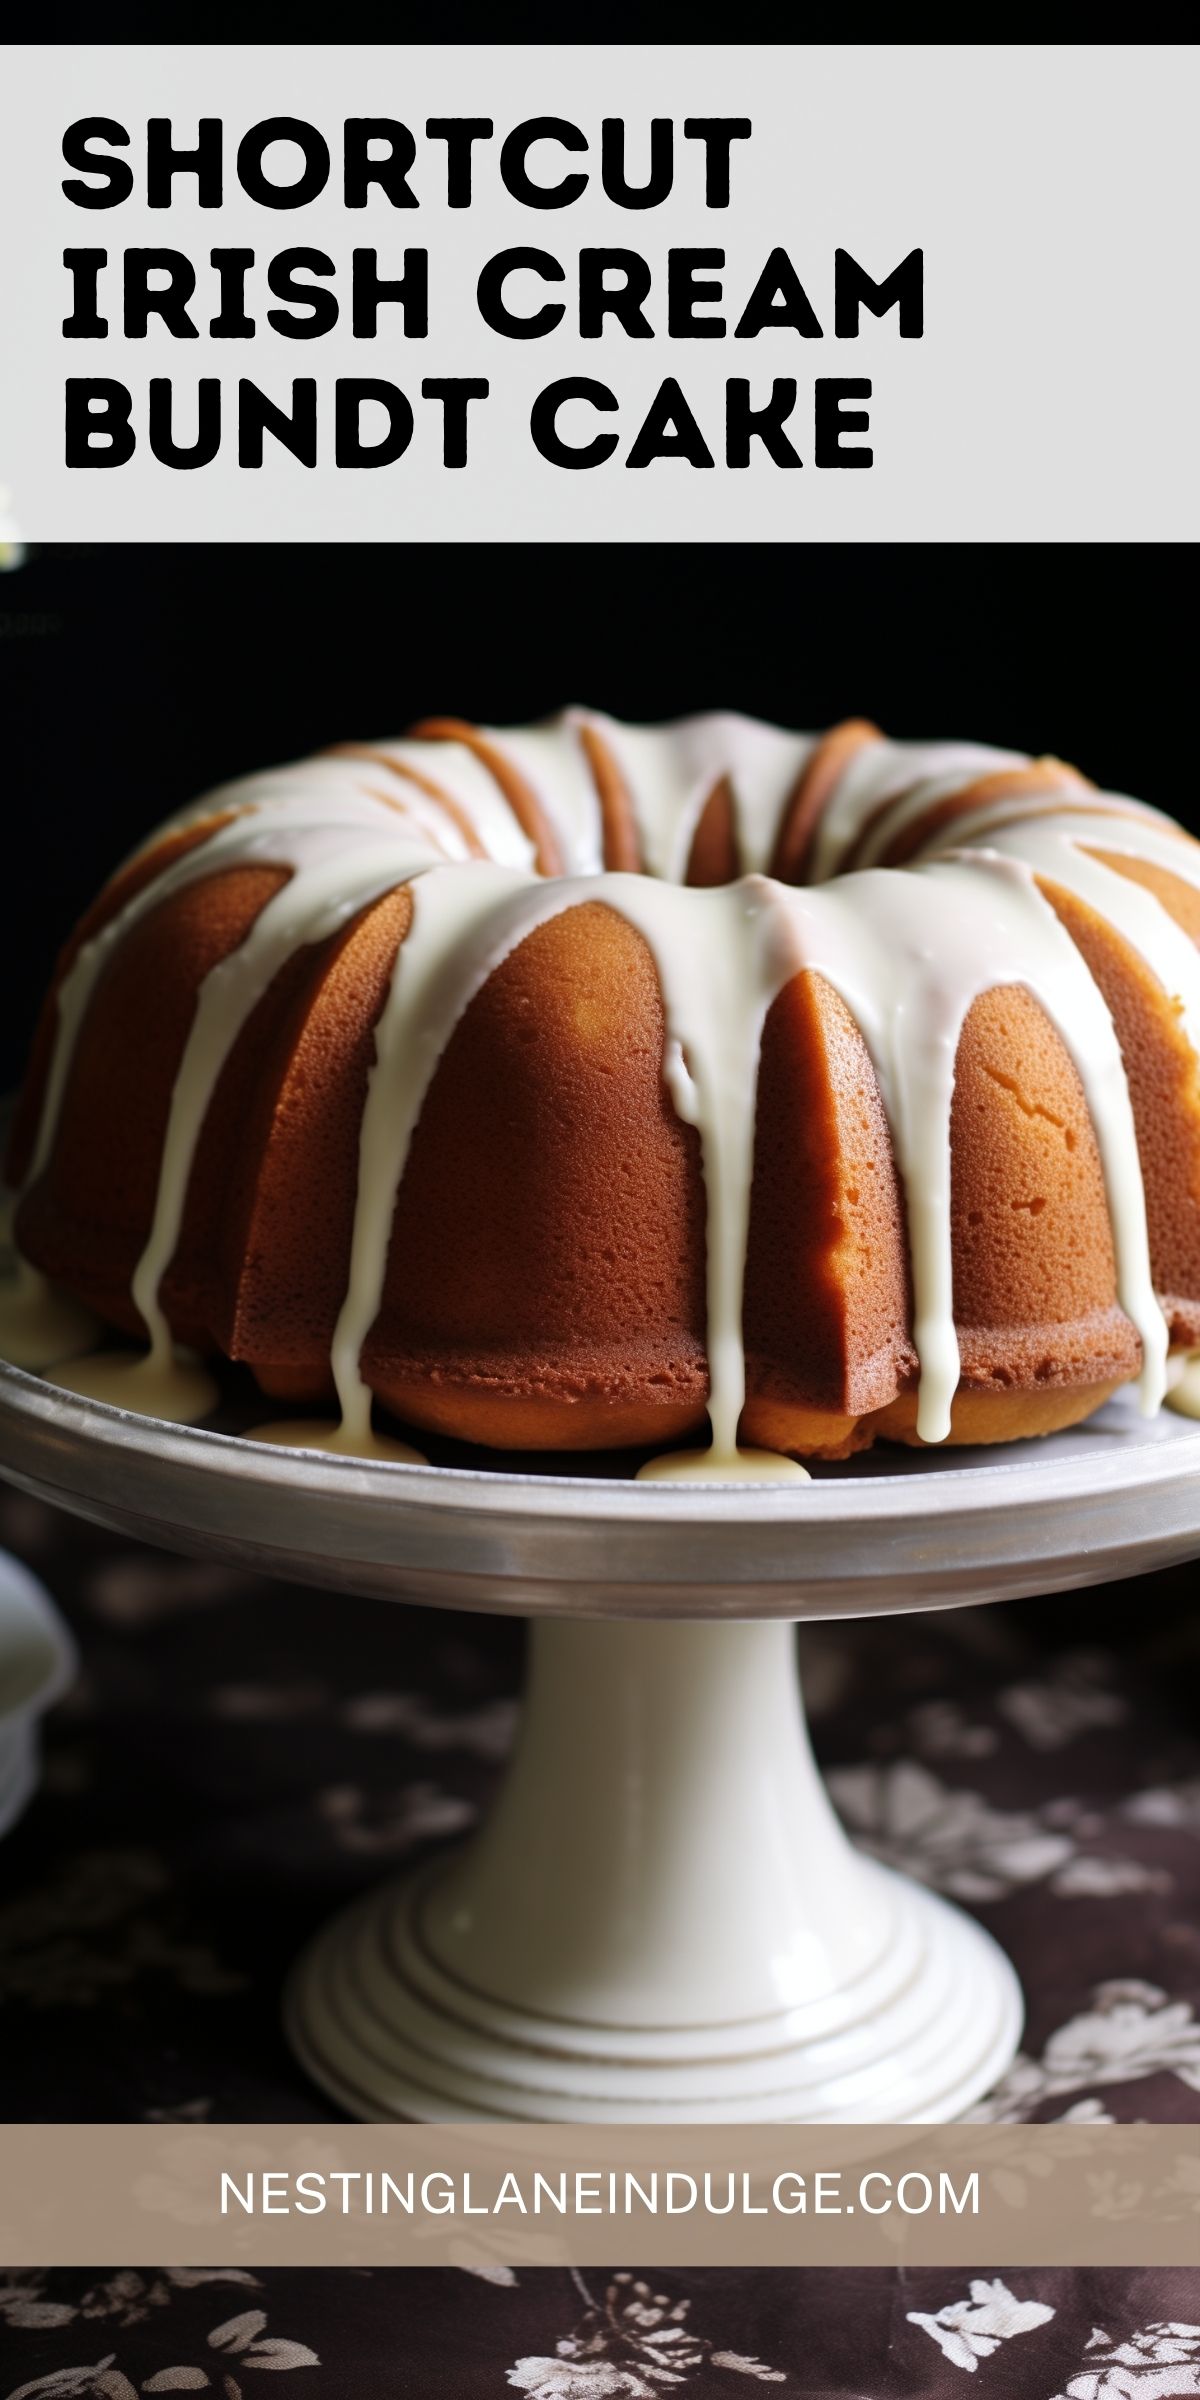 A promotional image featuring a Shortcut Irish Cream Bundt Cake on a white cake stand. Above the cake, large black text reads "SHORTCUT IRISH CREAM BUNDT CAKE," and below, the website "NESTINGLANEINDULGE.COM" is displayed. The cake has a white glaze topping over a golden-brown surface and sits elegantly against a dark floral background.